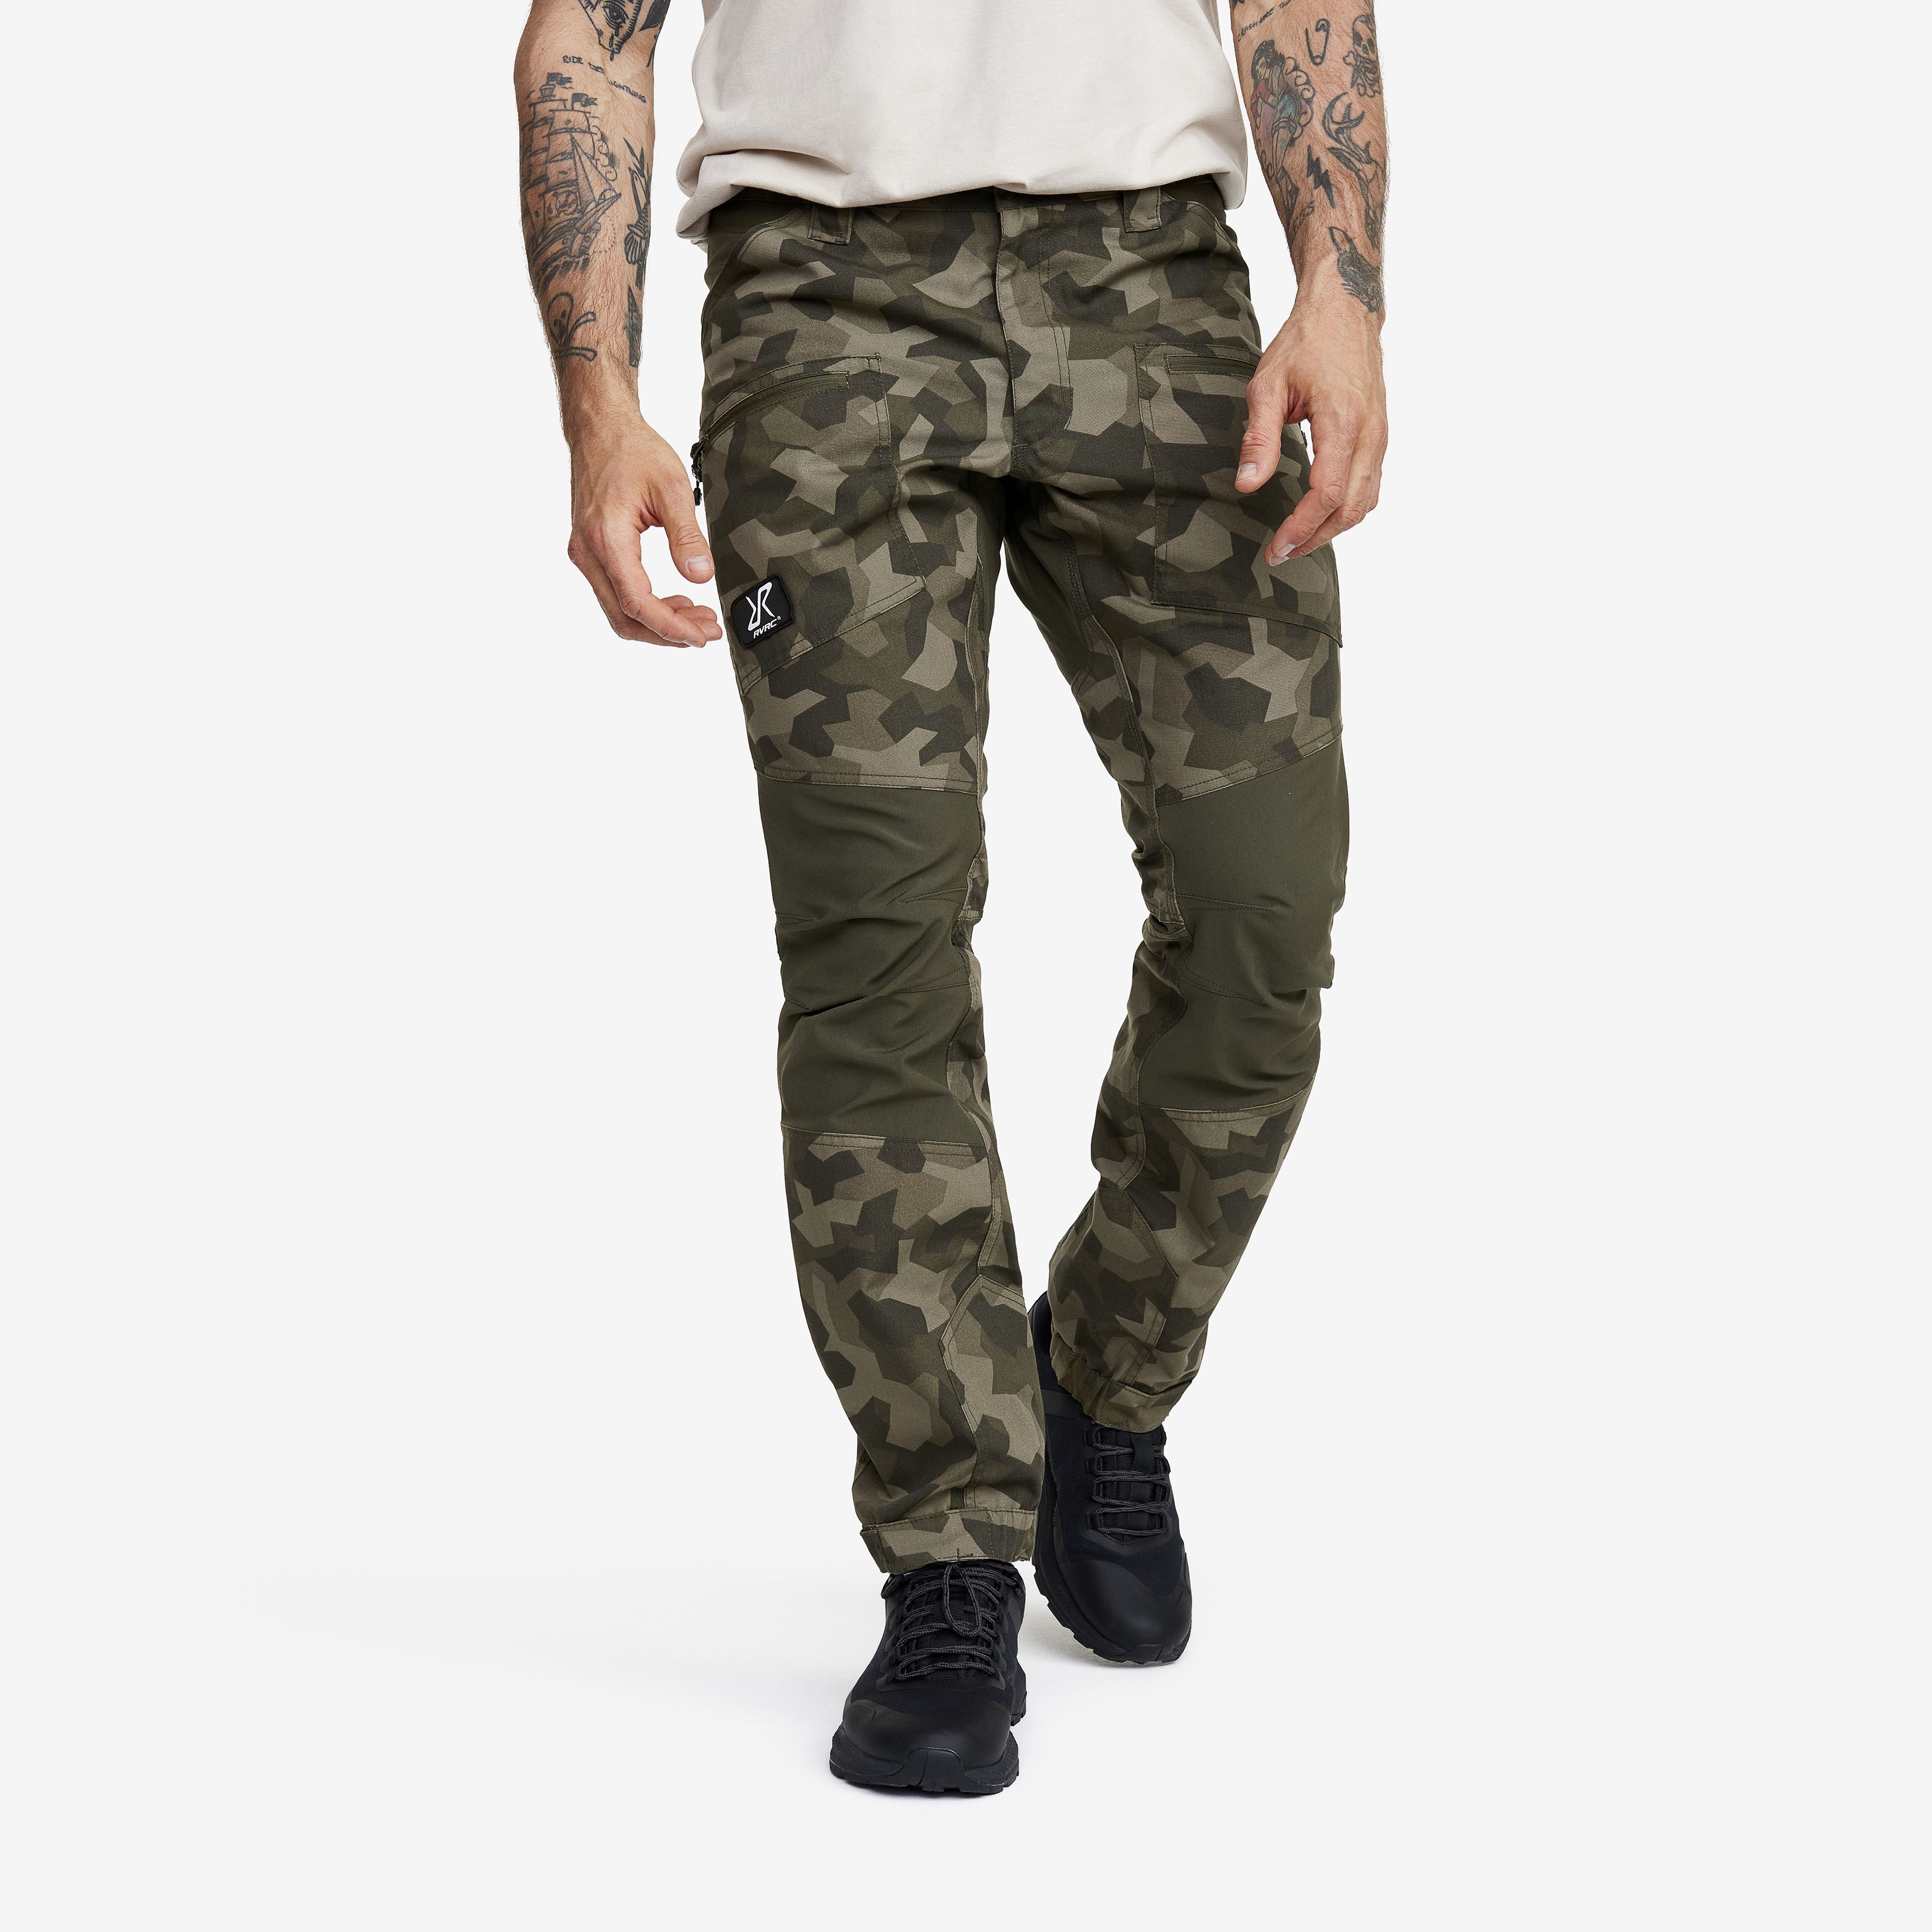 Nordwand Pro Pants Forest Camo Herre